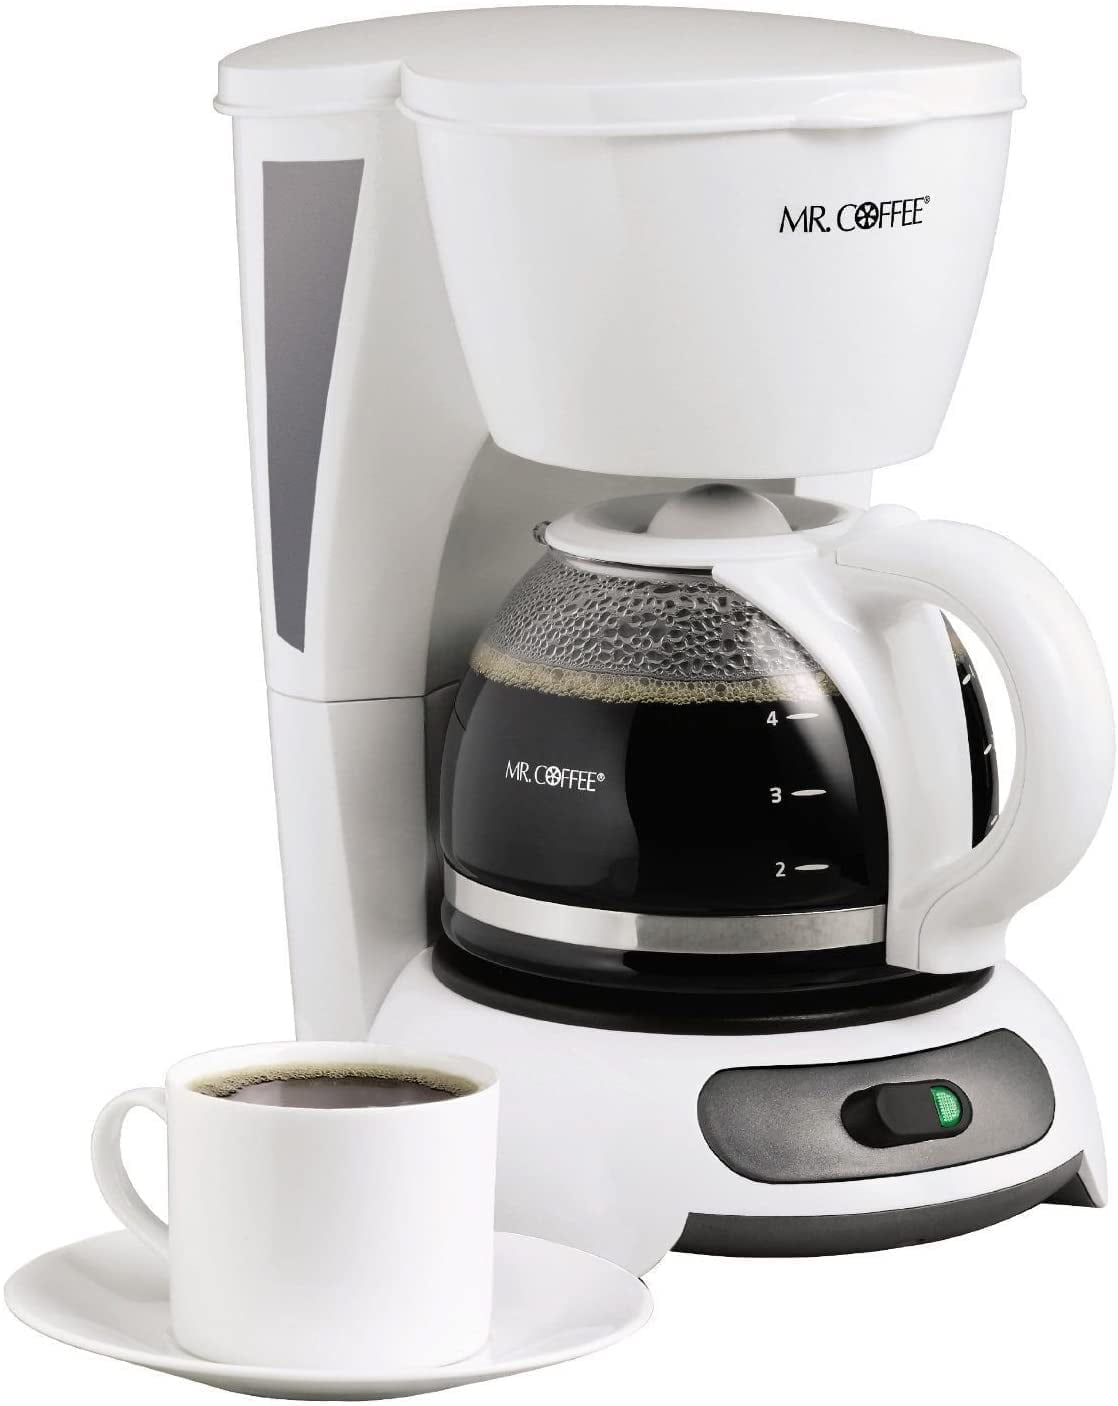 The best back-to-school tech package - Mr. Coffee CGX5 4-Cup